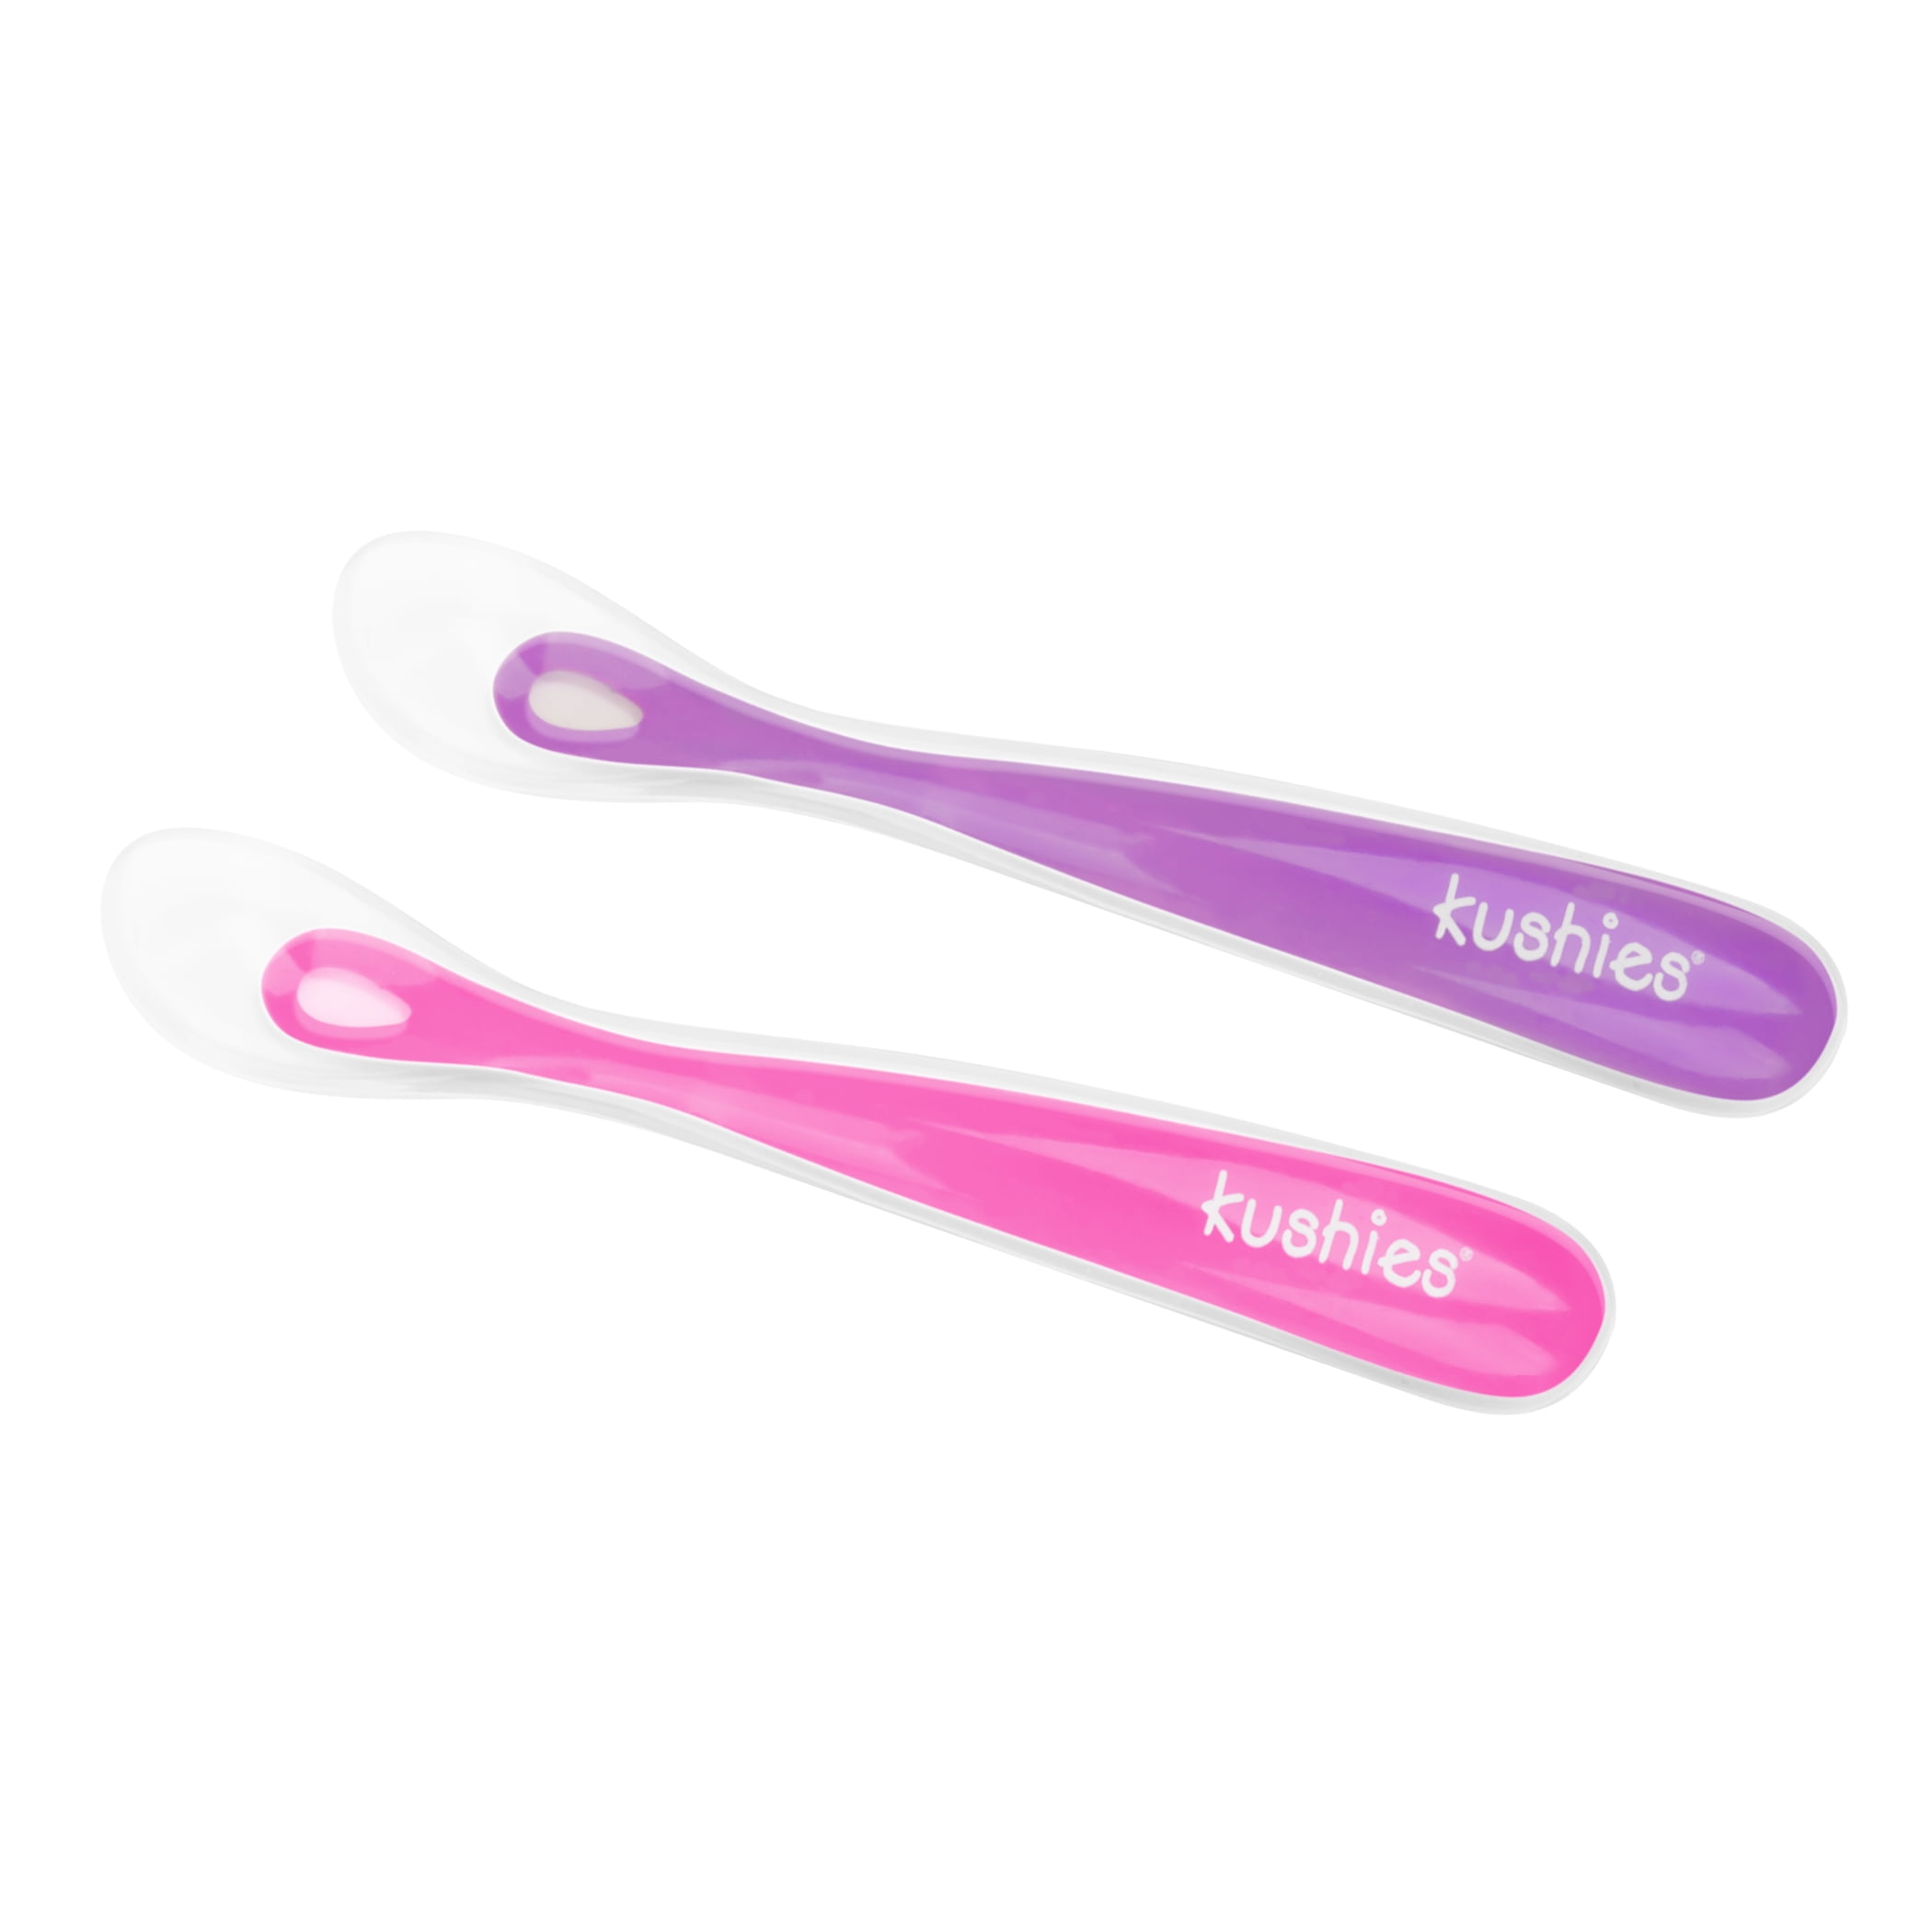 Grey Kushies SILIFEED Silicone Feeding Spoons for babies and toddlers Pink/Purple 2 PK